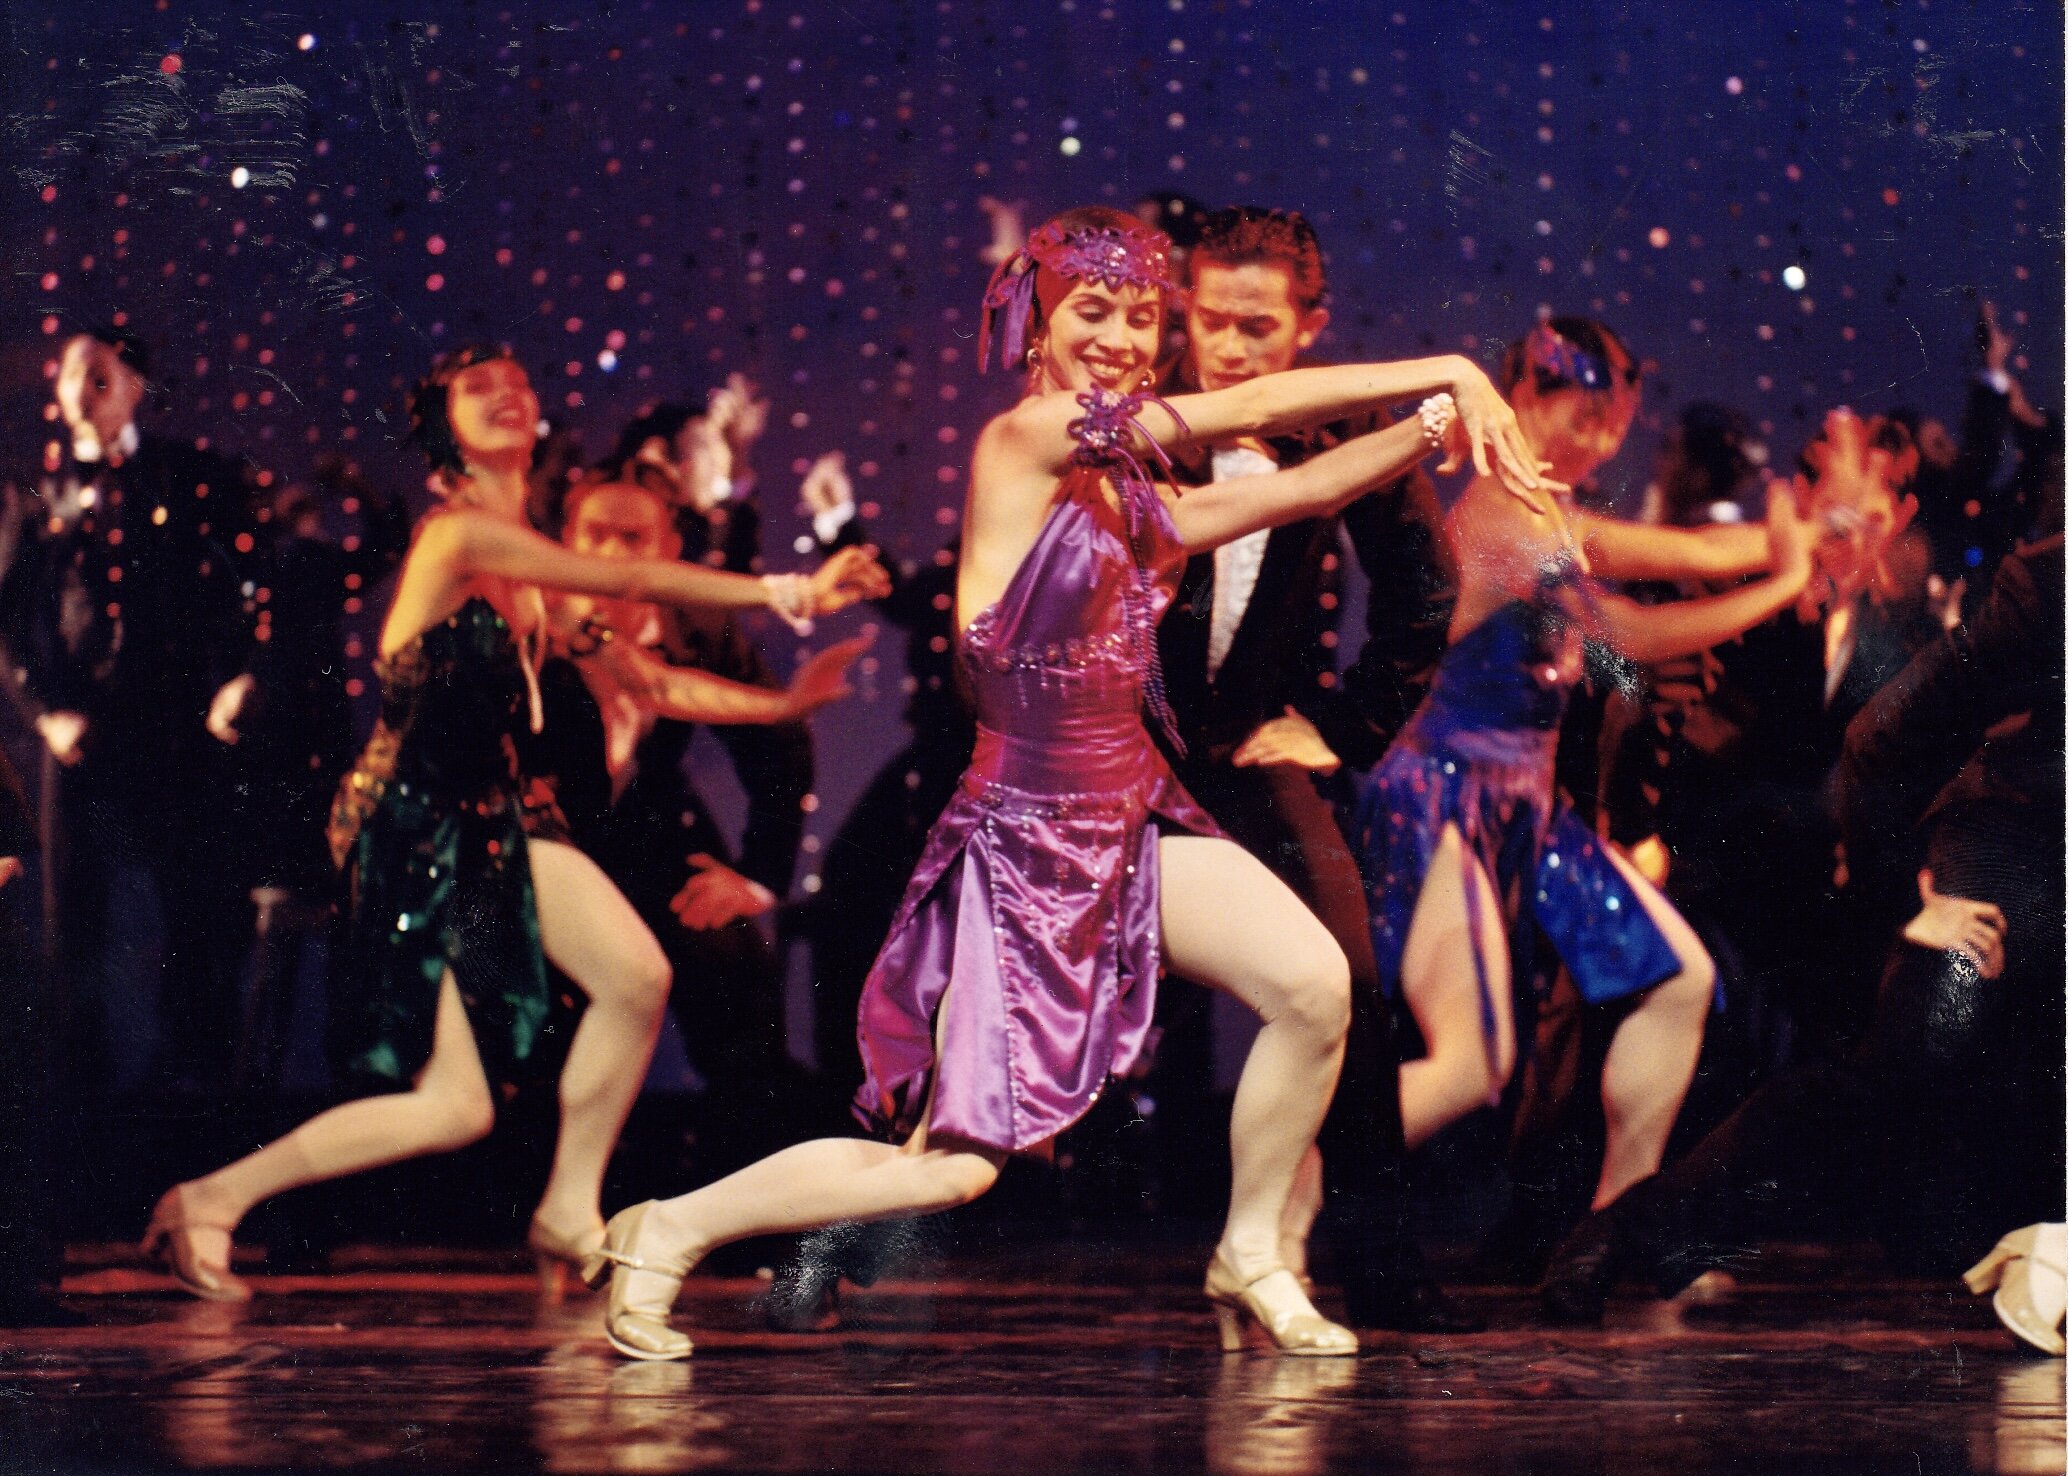    A plum dress to match a plum role. Melanie Motus is part of a rare ballet number set in the Roaring Twenties. This is  Sugar-Step Elizalde , choreographed by Tony Fabella and using the music of the irrepressible maestro, Federico “Fred” Elizalde, 